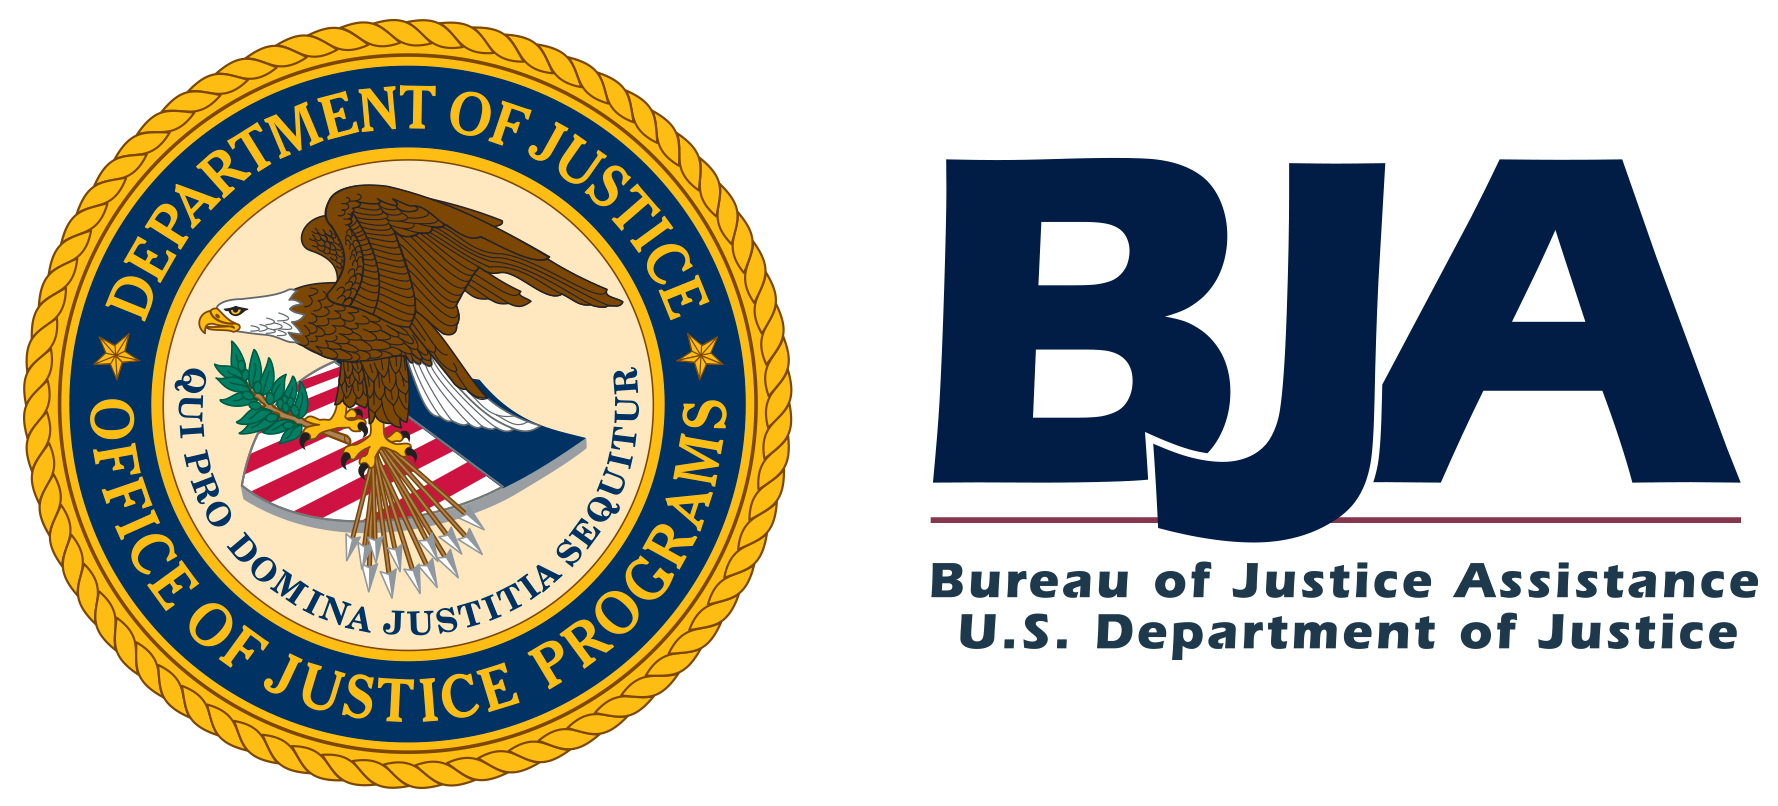 Bureau of Justice Assistance logo next to Office of Justice Programs seal